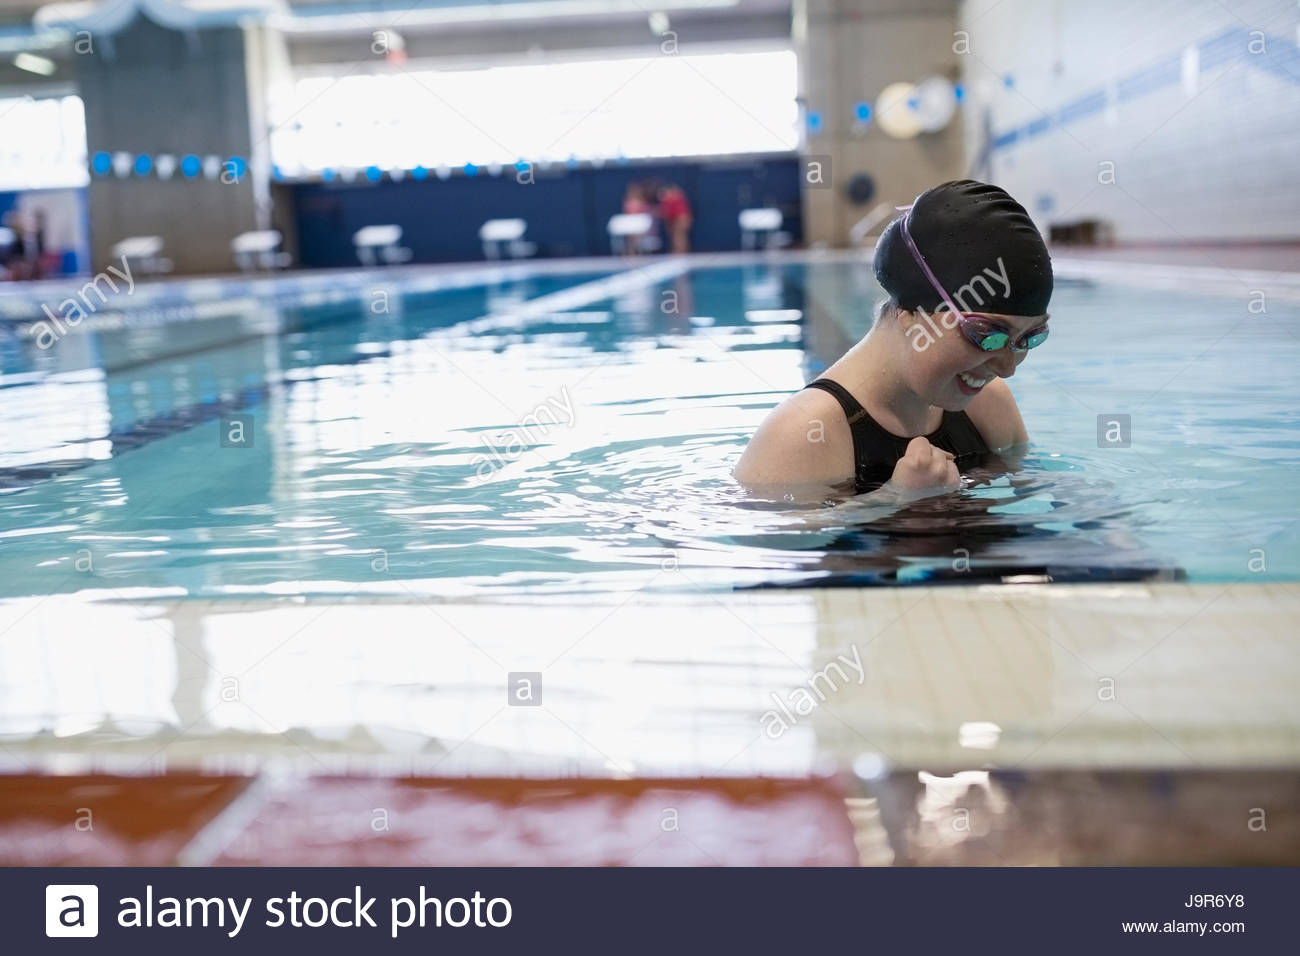 Smiling young woman swimmer in swimming pool Stock Photo